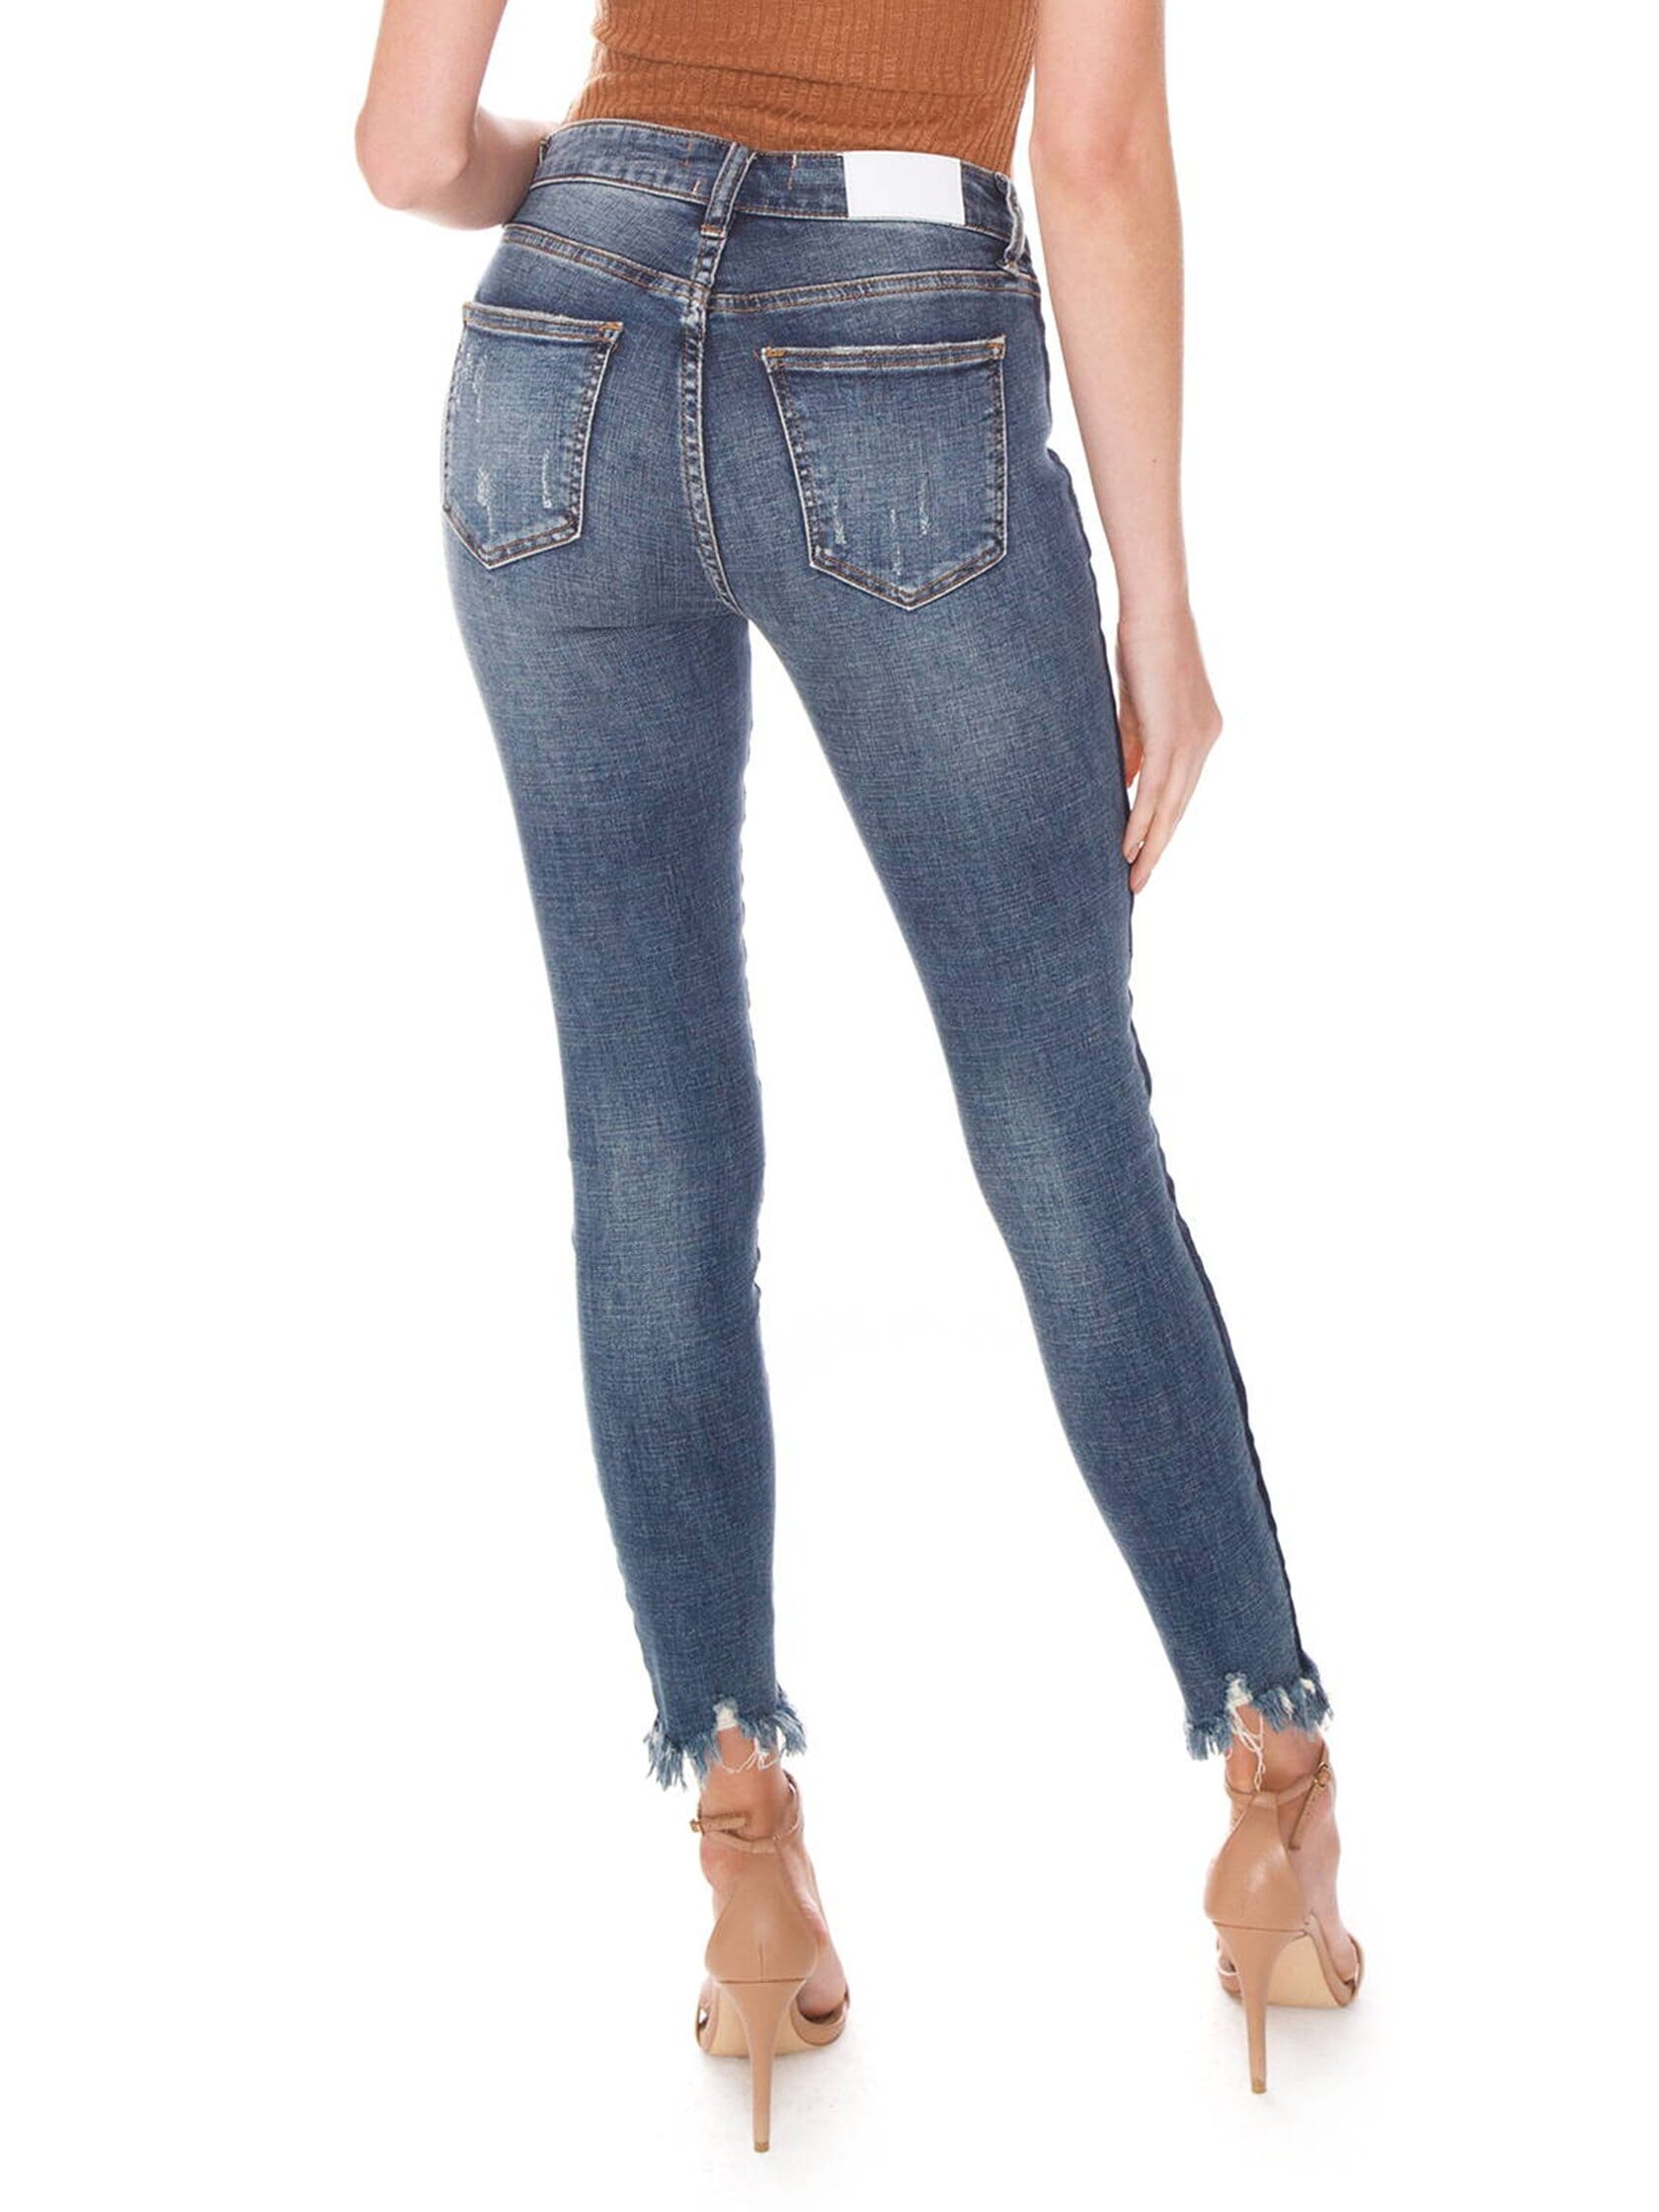 PISTOLA Audrey Mid Rise Skinny Jeans - Situational in Situational